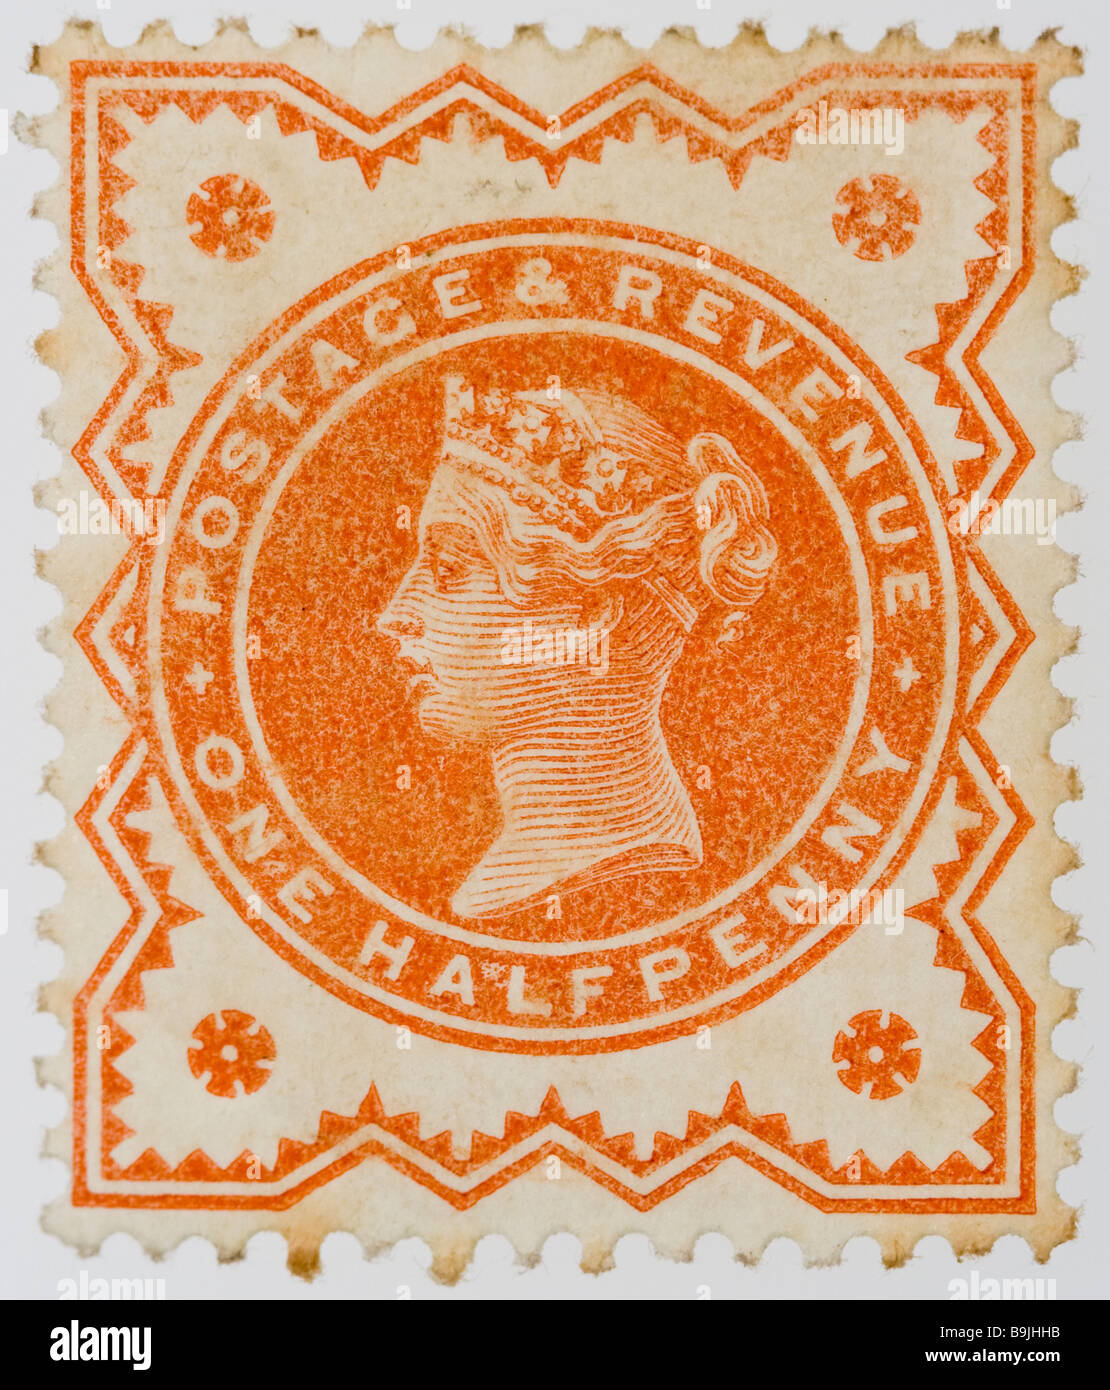 Close up of ½d, one half penny orange Victorian British Postal stamp on  white background issued between 1887-1900, part of the 'Jubilee Issue'.  Mint Stock Photo - Alamy